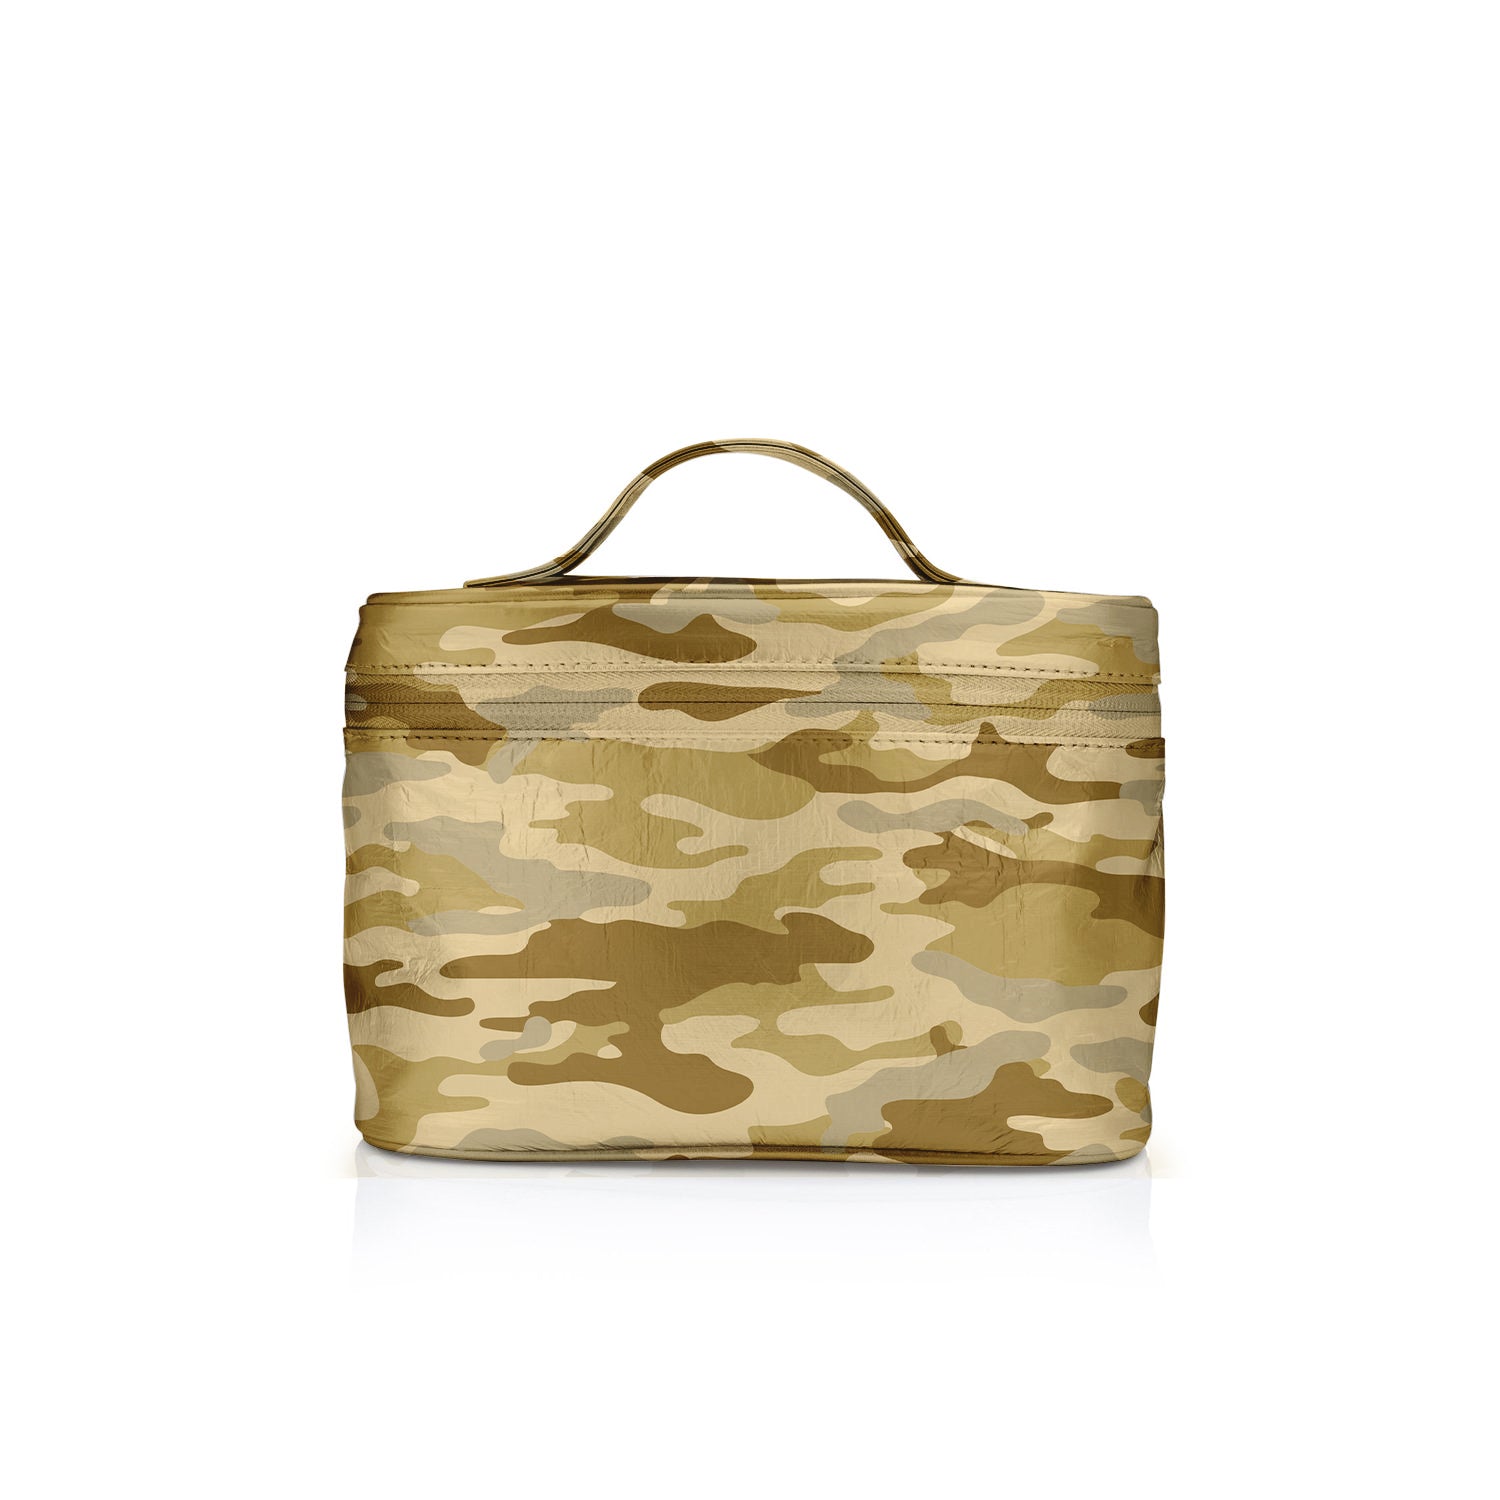 Cosmetic Case or Lunch Box in Metallic Gold Camo